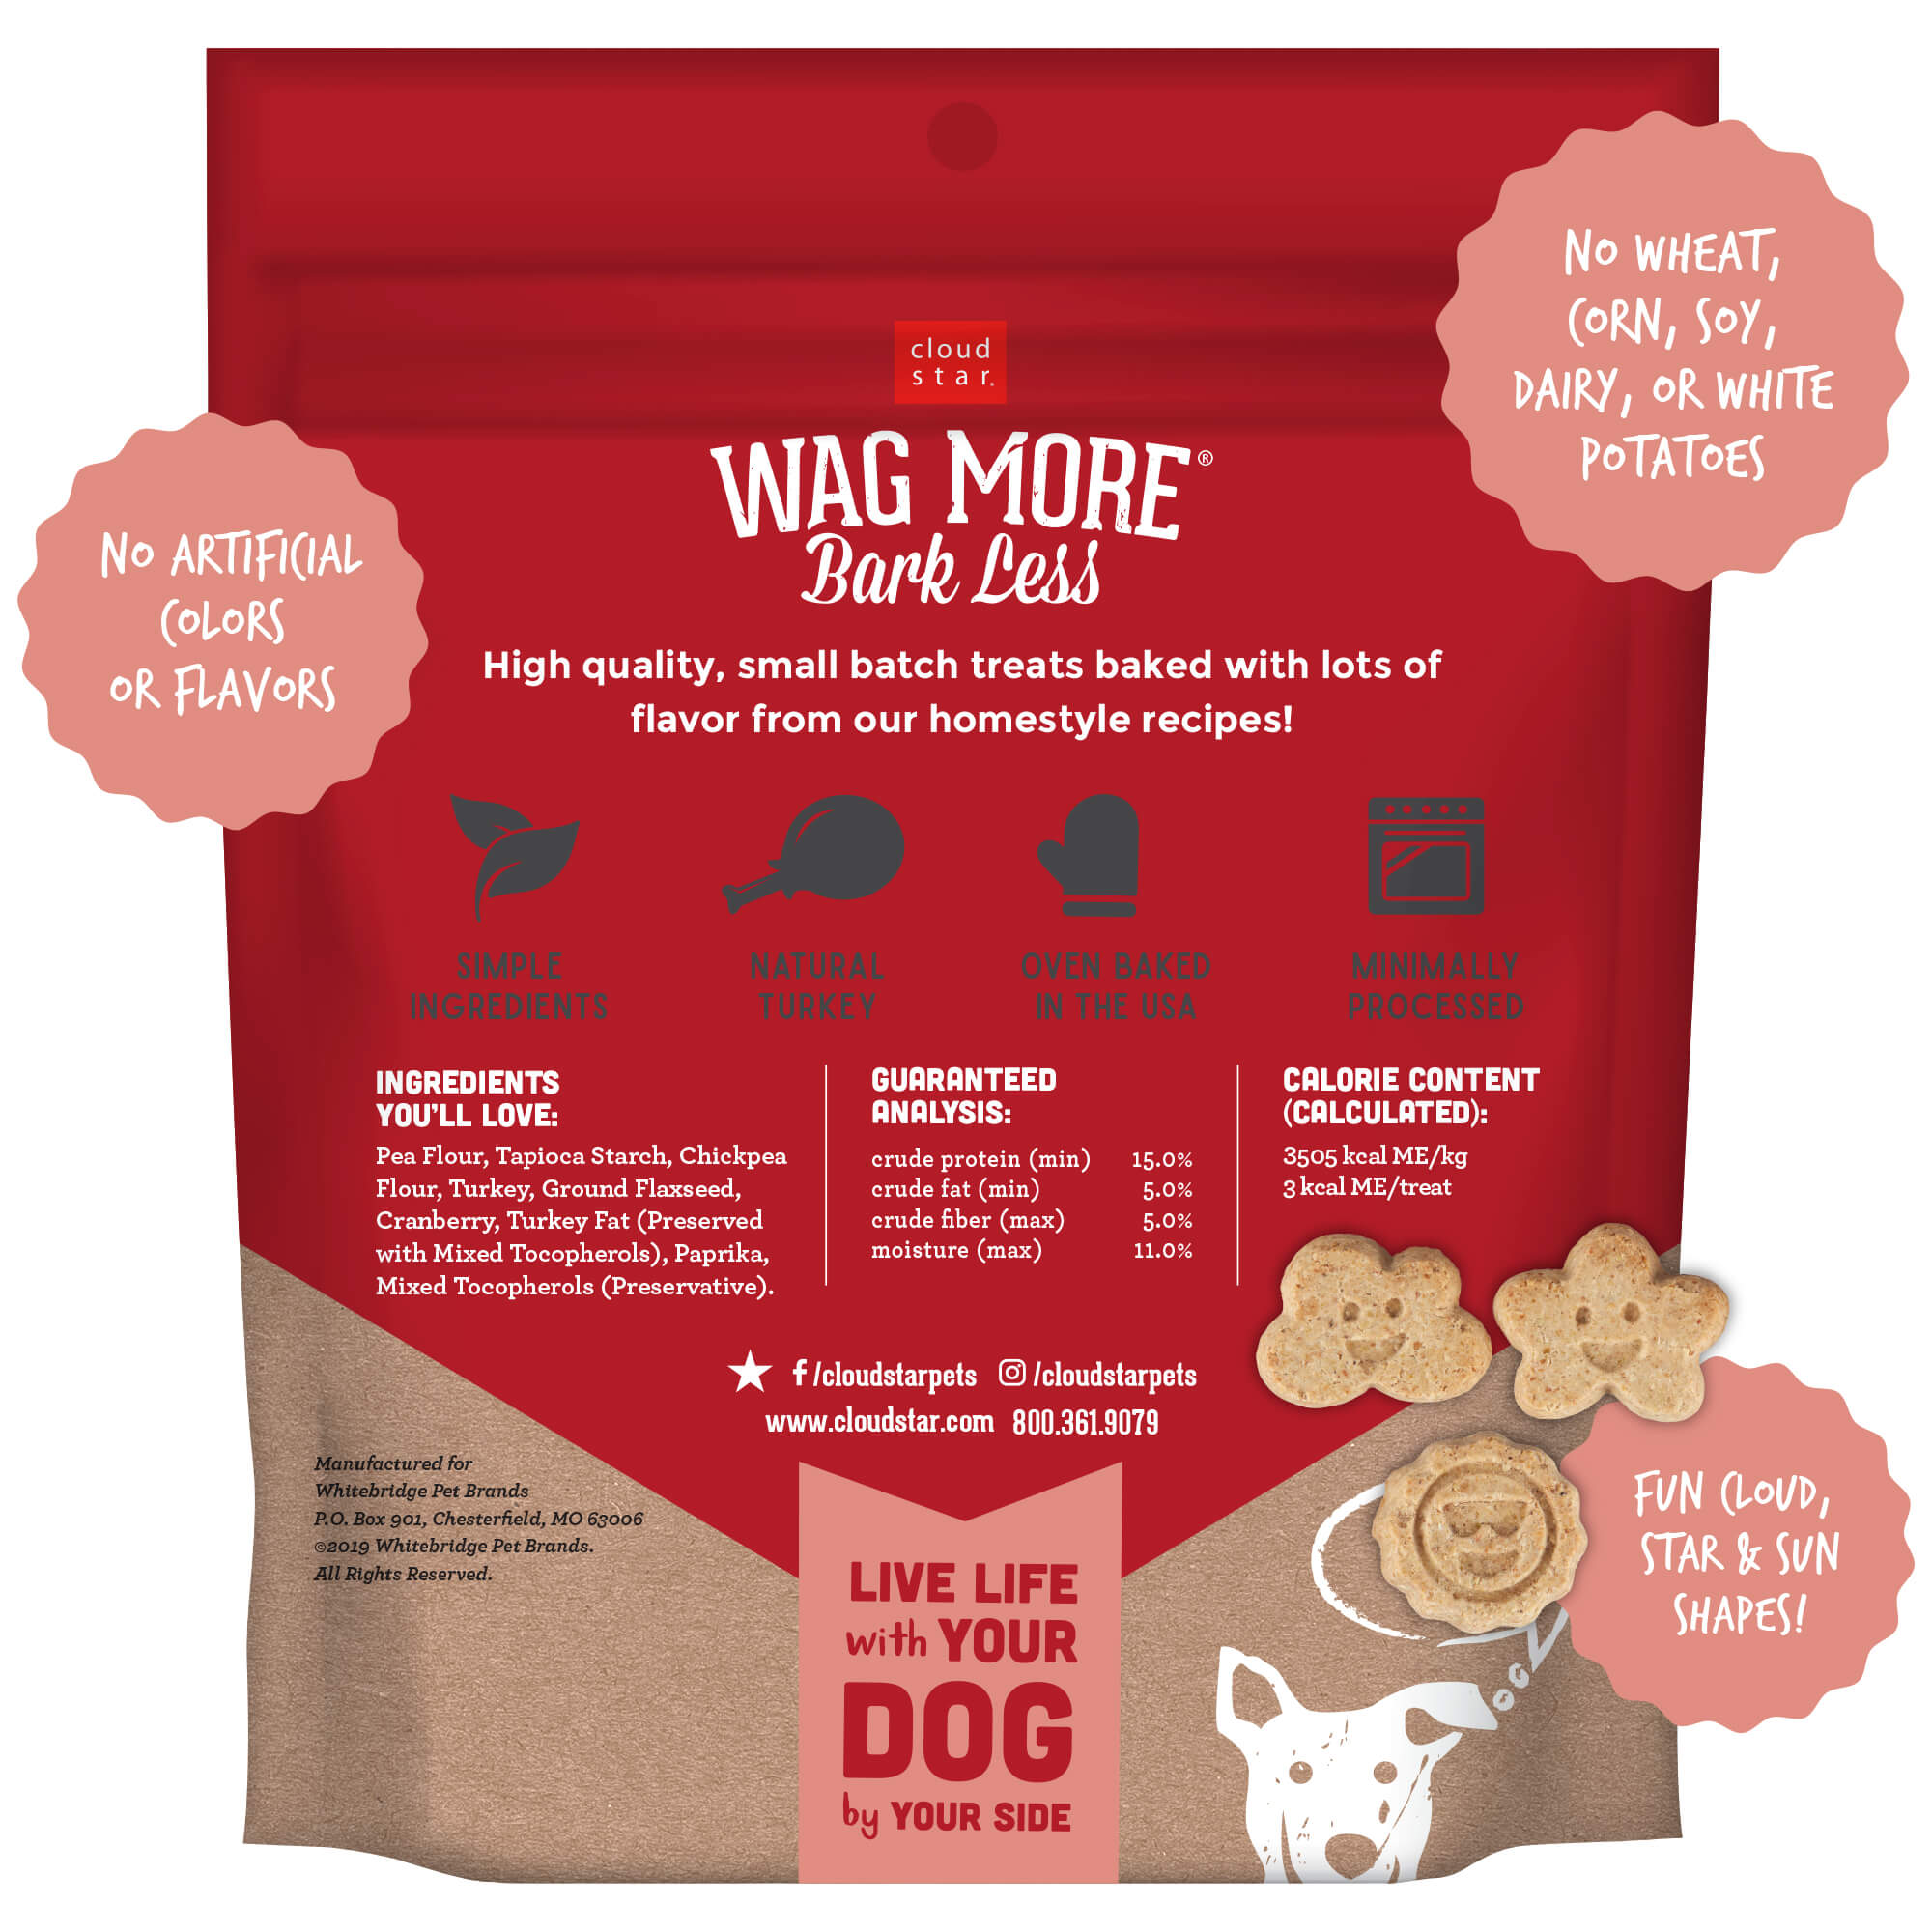 Cloud Star Wag More Bark Less Mini Biscuits Grain Free Oven Baked Dog Treats with Turkey & Cranberry, 7oz